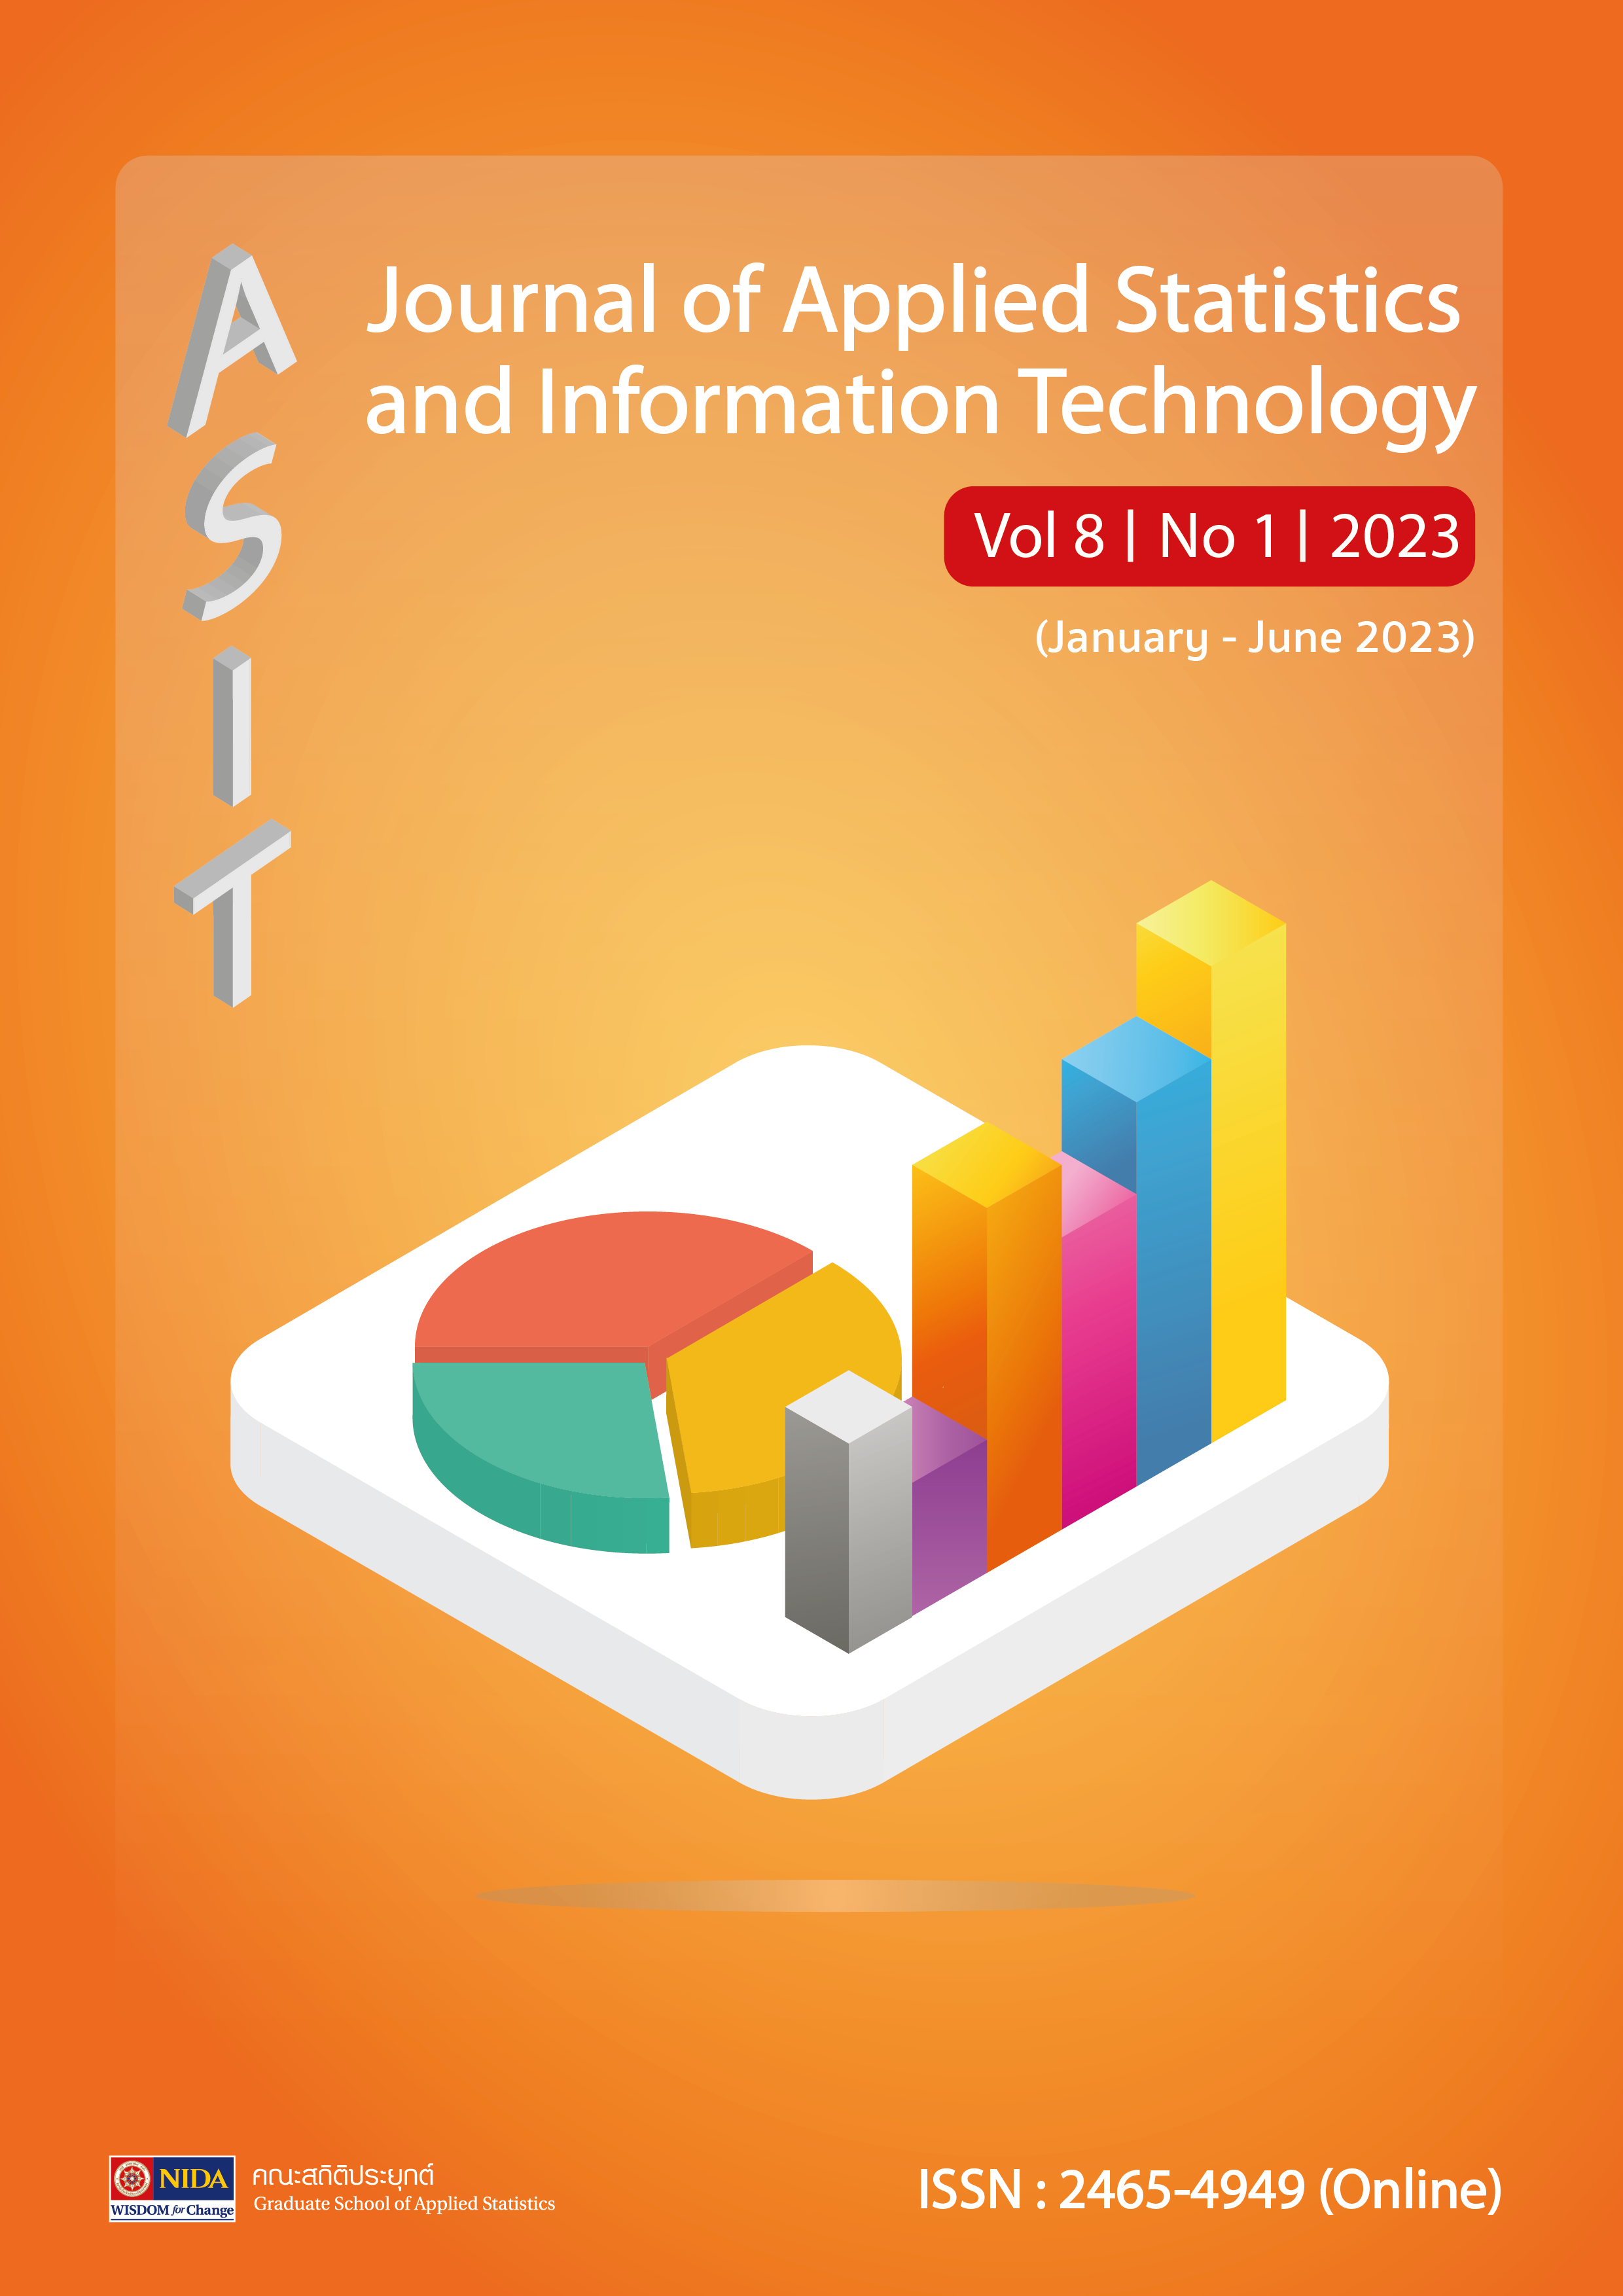 					View Vol. 8 No. 1 (2023): Journal of Applied Statistics and Information Technology Vol 8 No 1 (January - June 2023)
				